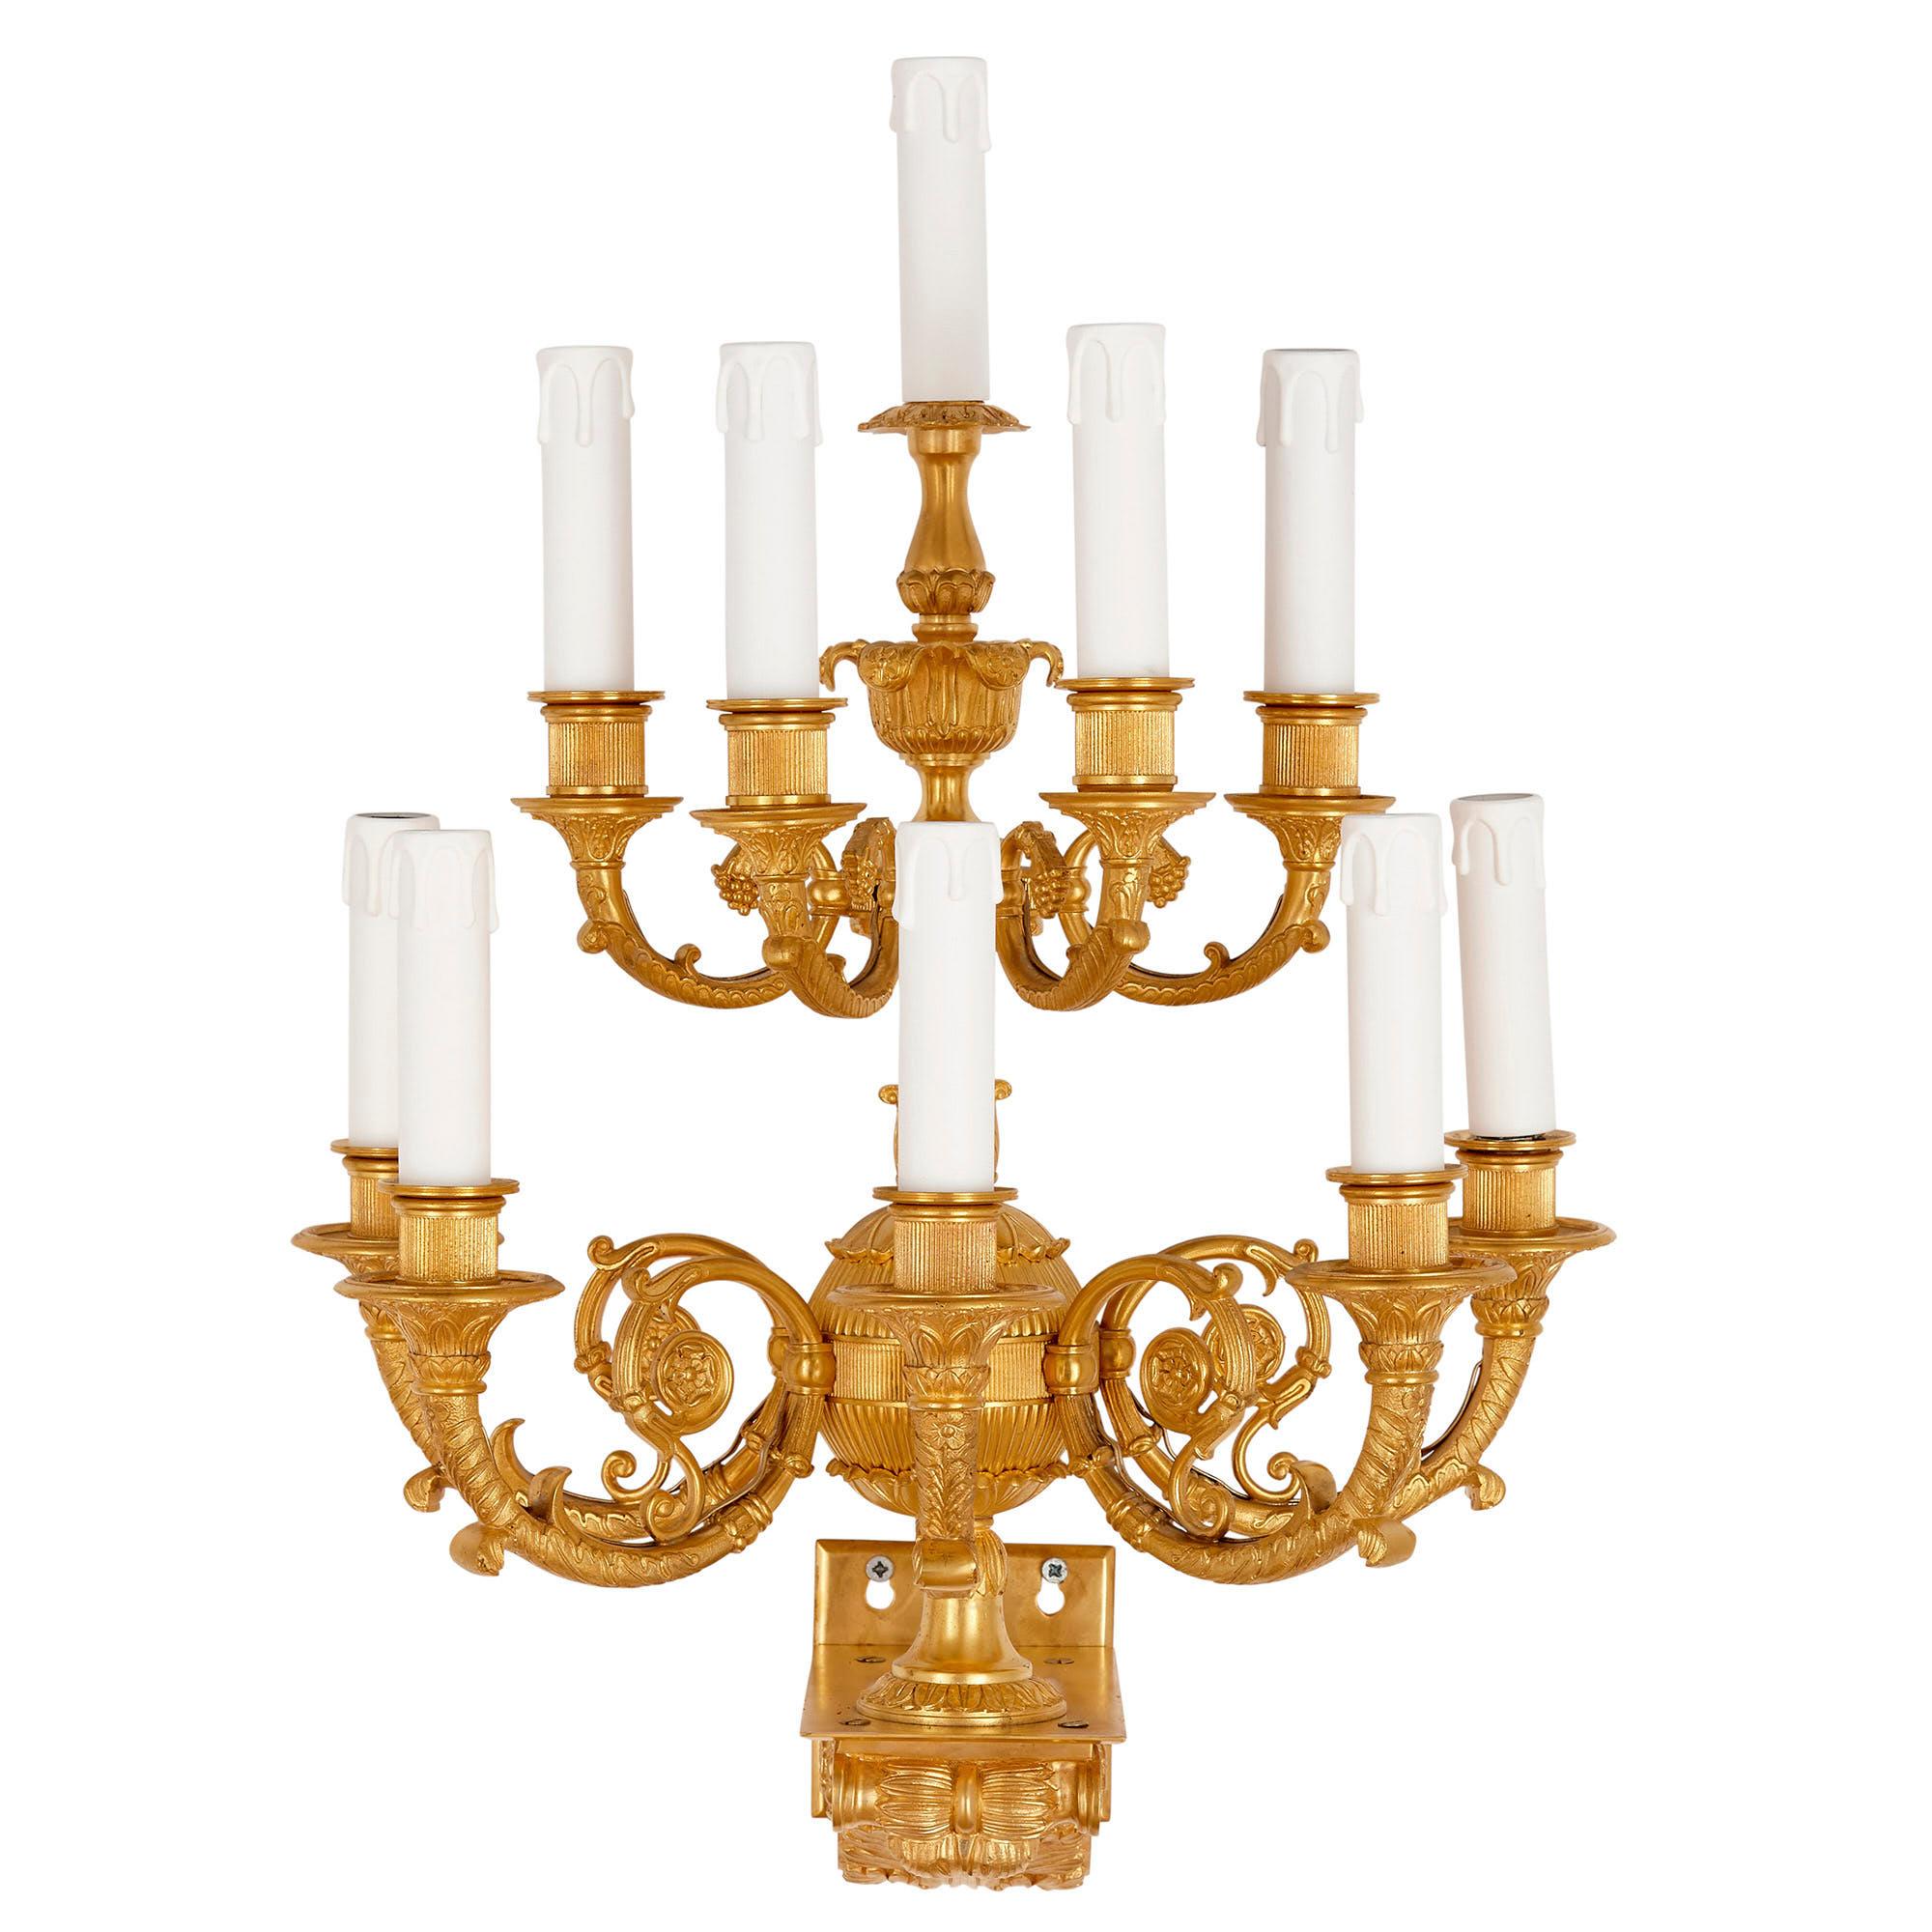 Set of three Neoclassical gilt bronze wall lights
French, c. 1890
Measures: Height 56cm, width 40cm, depth 32cm

This set of three wall lights is crafted in a Neoclassical, French Empire style. Each wall light is crafted entirely from gilt